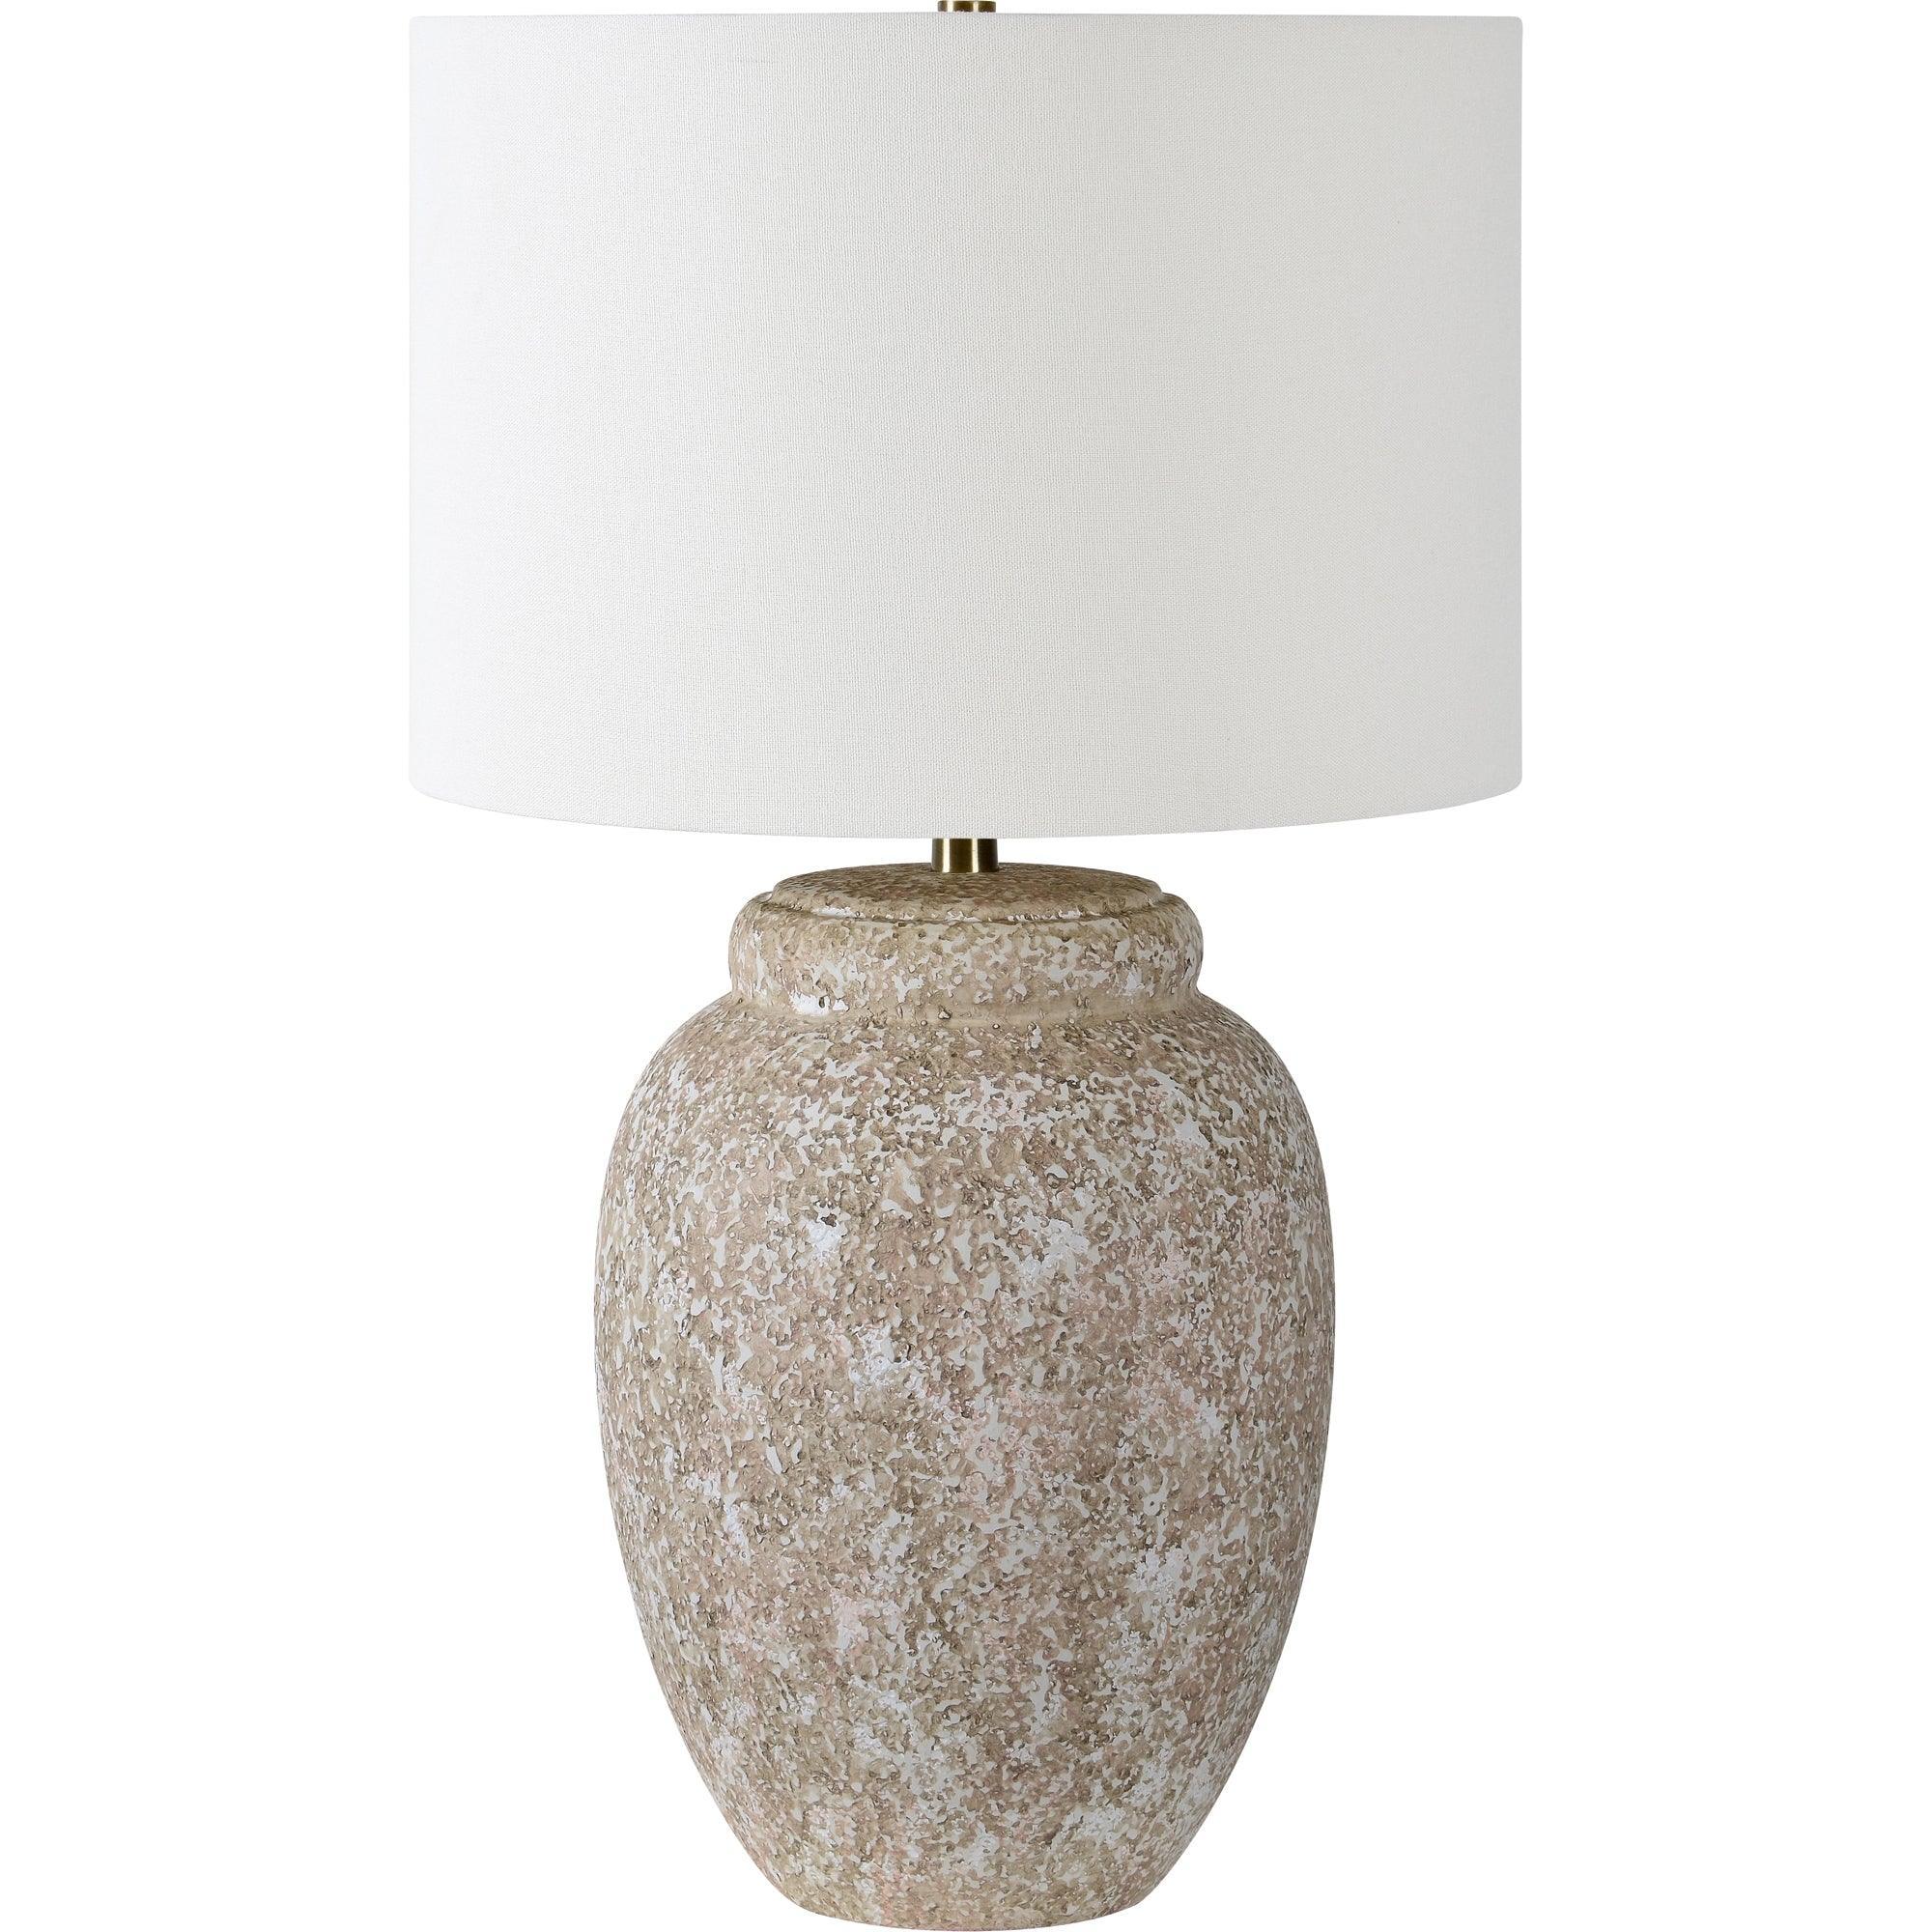 Renwil - Wassily Table Lamp - LPT1182 | Montreal Lighting & Hardware